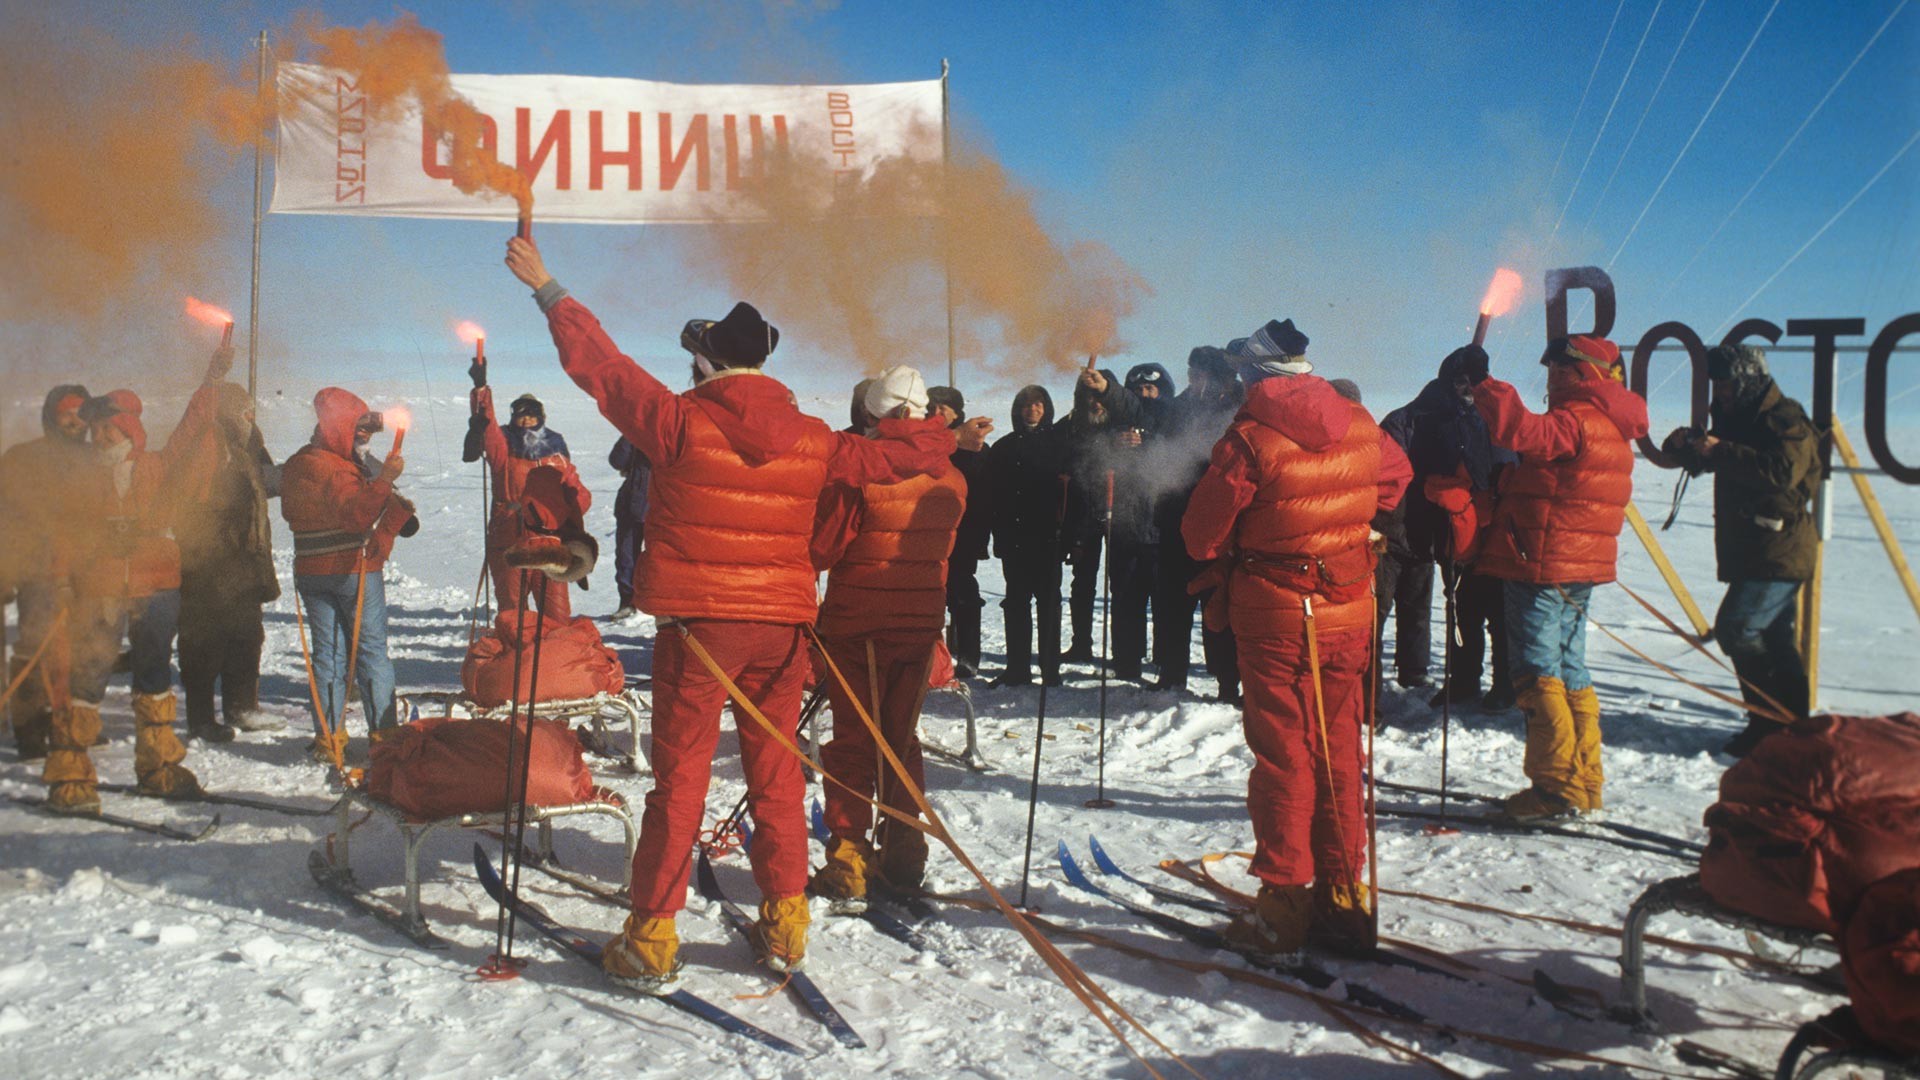 For the last 12 kilometers, the women walked dressed in red uniforms, to mark the latest achievement of the Soviet women that had previously been thought to be highly unlikely.